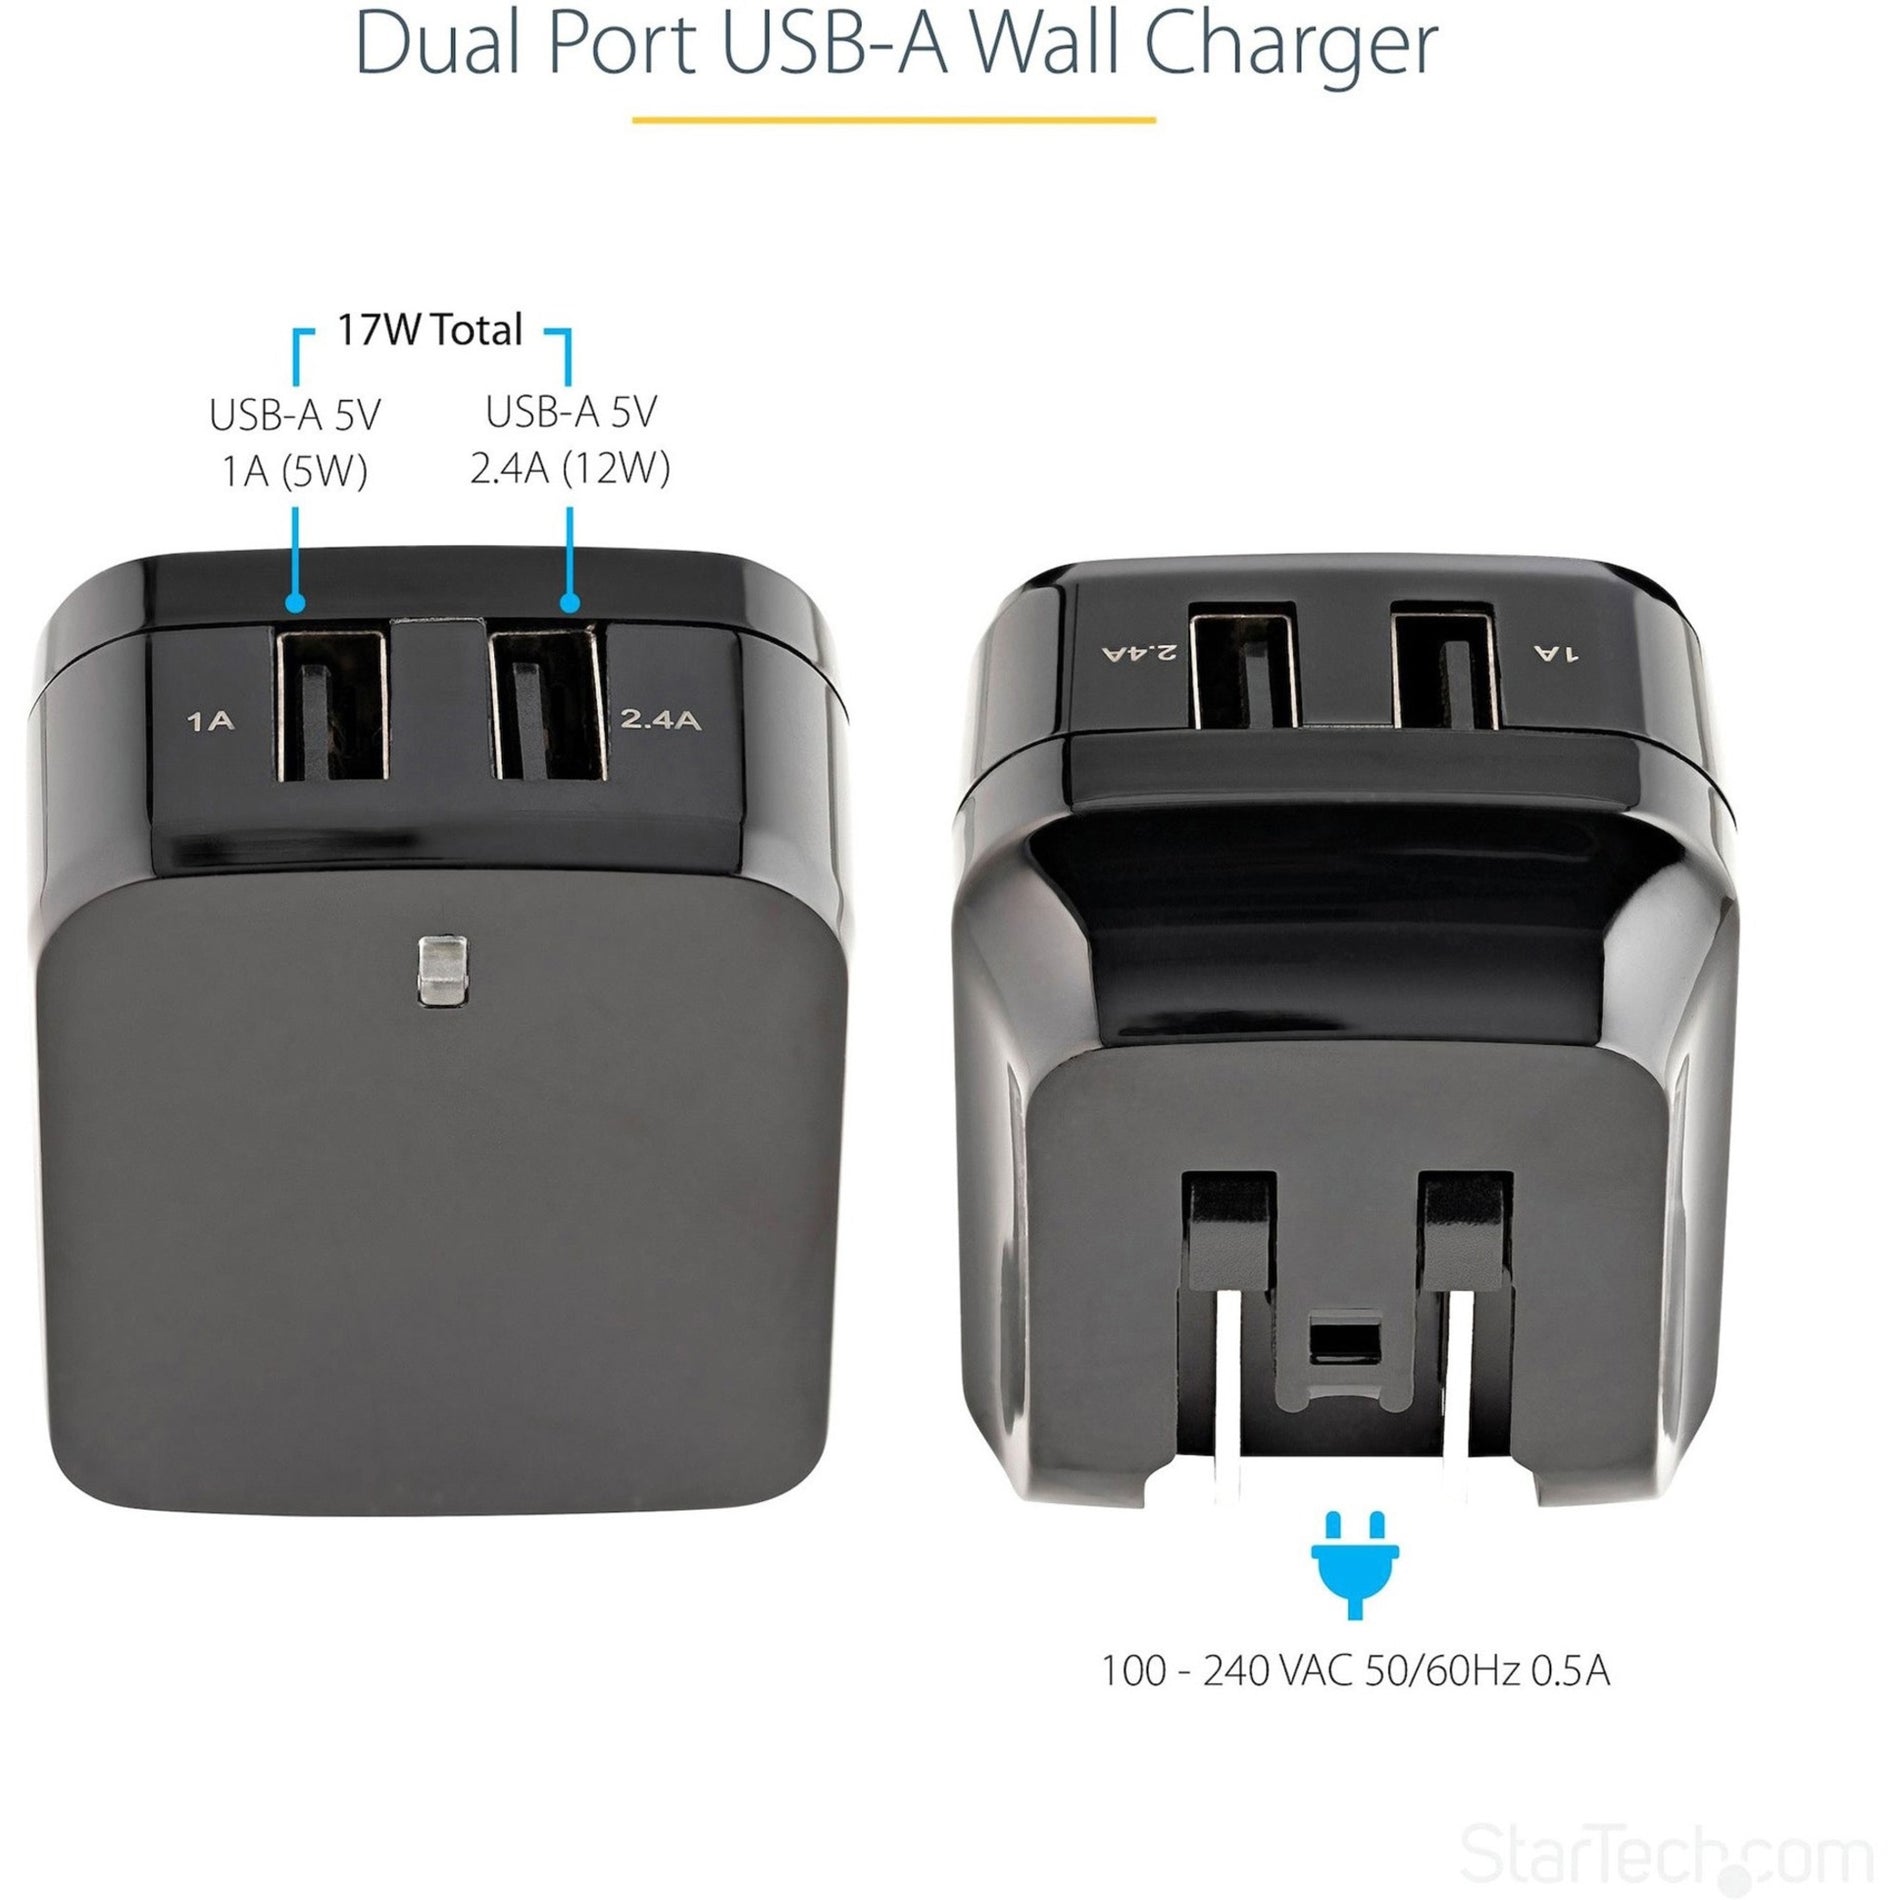 StarTech.com USB2PACUBK 2 Port USB Wall Charger, Dual USB-A Power Adapter, Portable Charger for Phones/Tablets